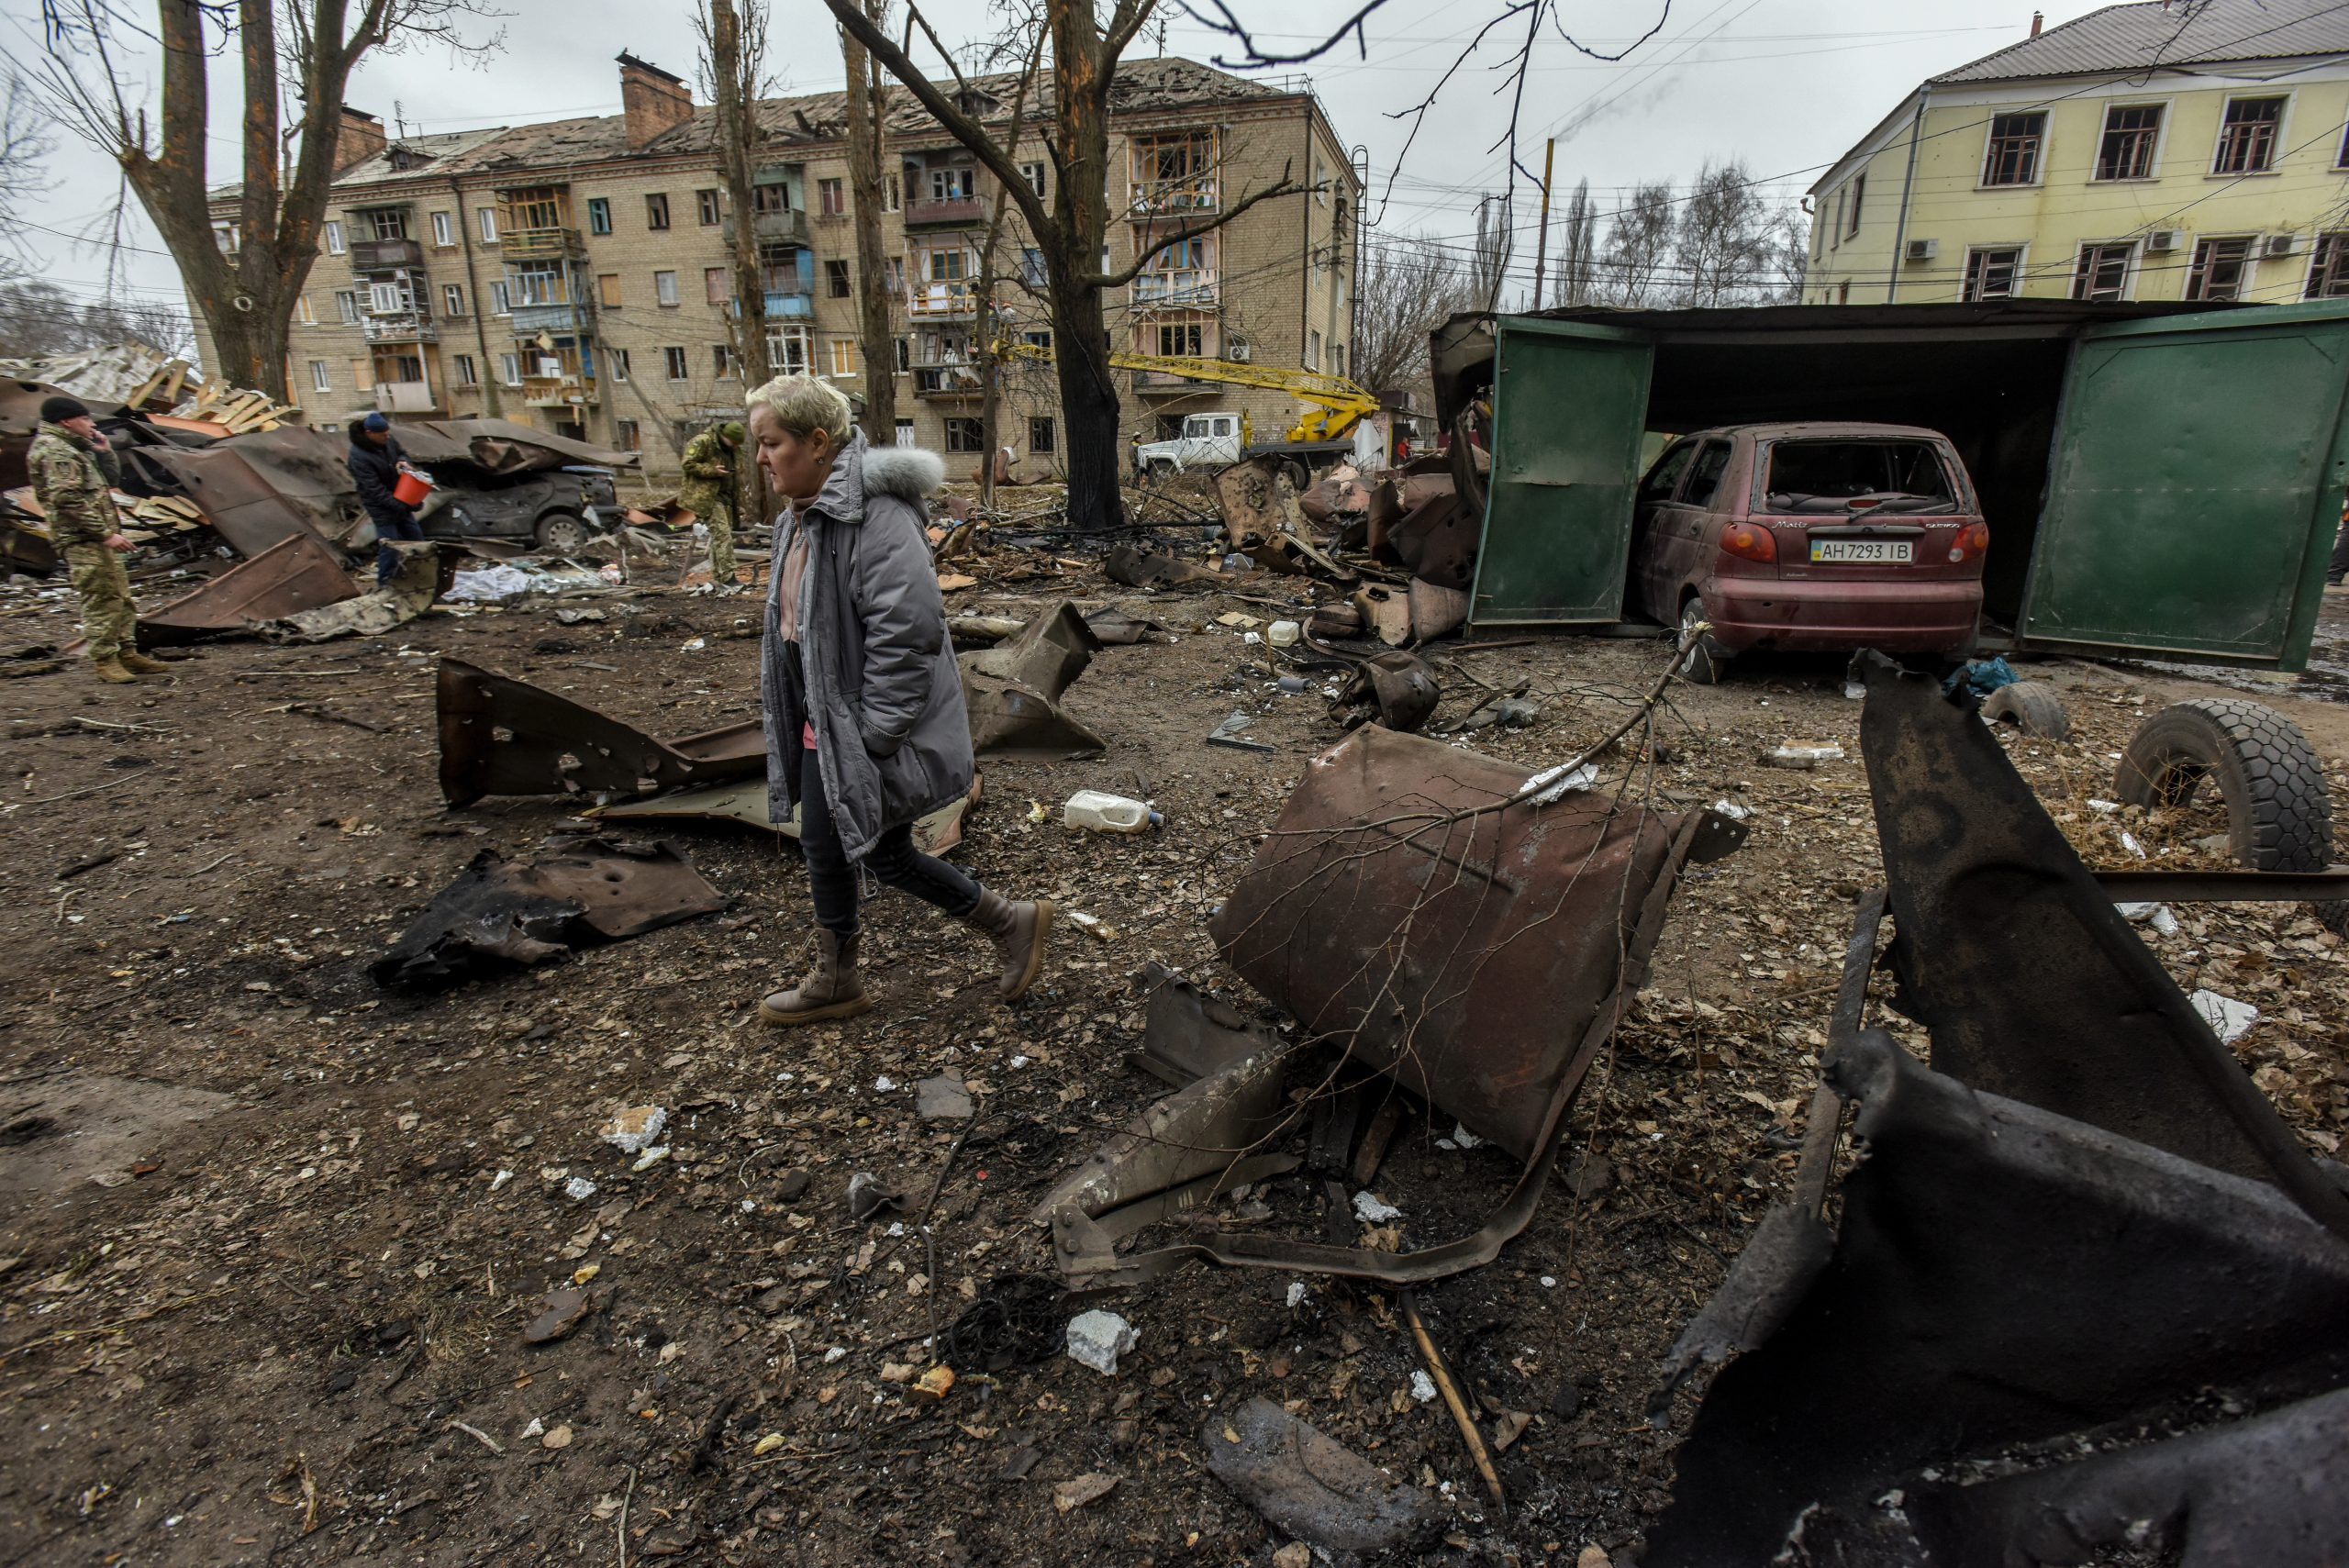 epa10436256 A local woman walks near the site of a Russian rocket strike in Konstyantynivka town, Donetsk region, eastern Ukraine, 28 January 2023. Three civilians were killed, and at least two injured as a result of Russia’s missile strike on the city of Kostyantynivka, according to Pavlo Kyrylenko, the head of the regional administration.  EPA/OLEG PETRASYUK